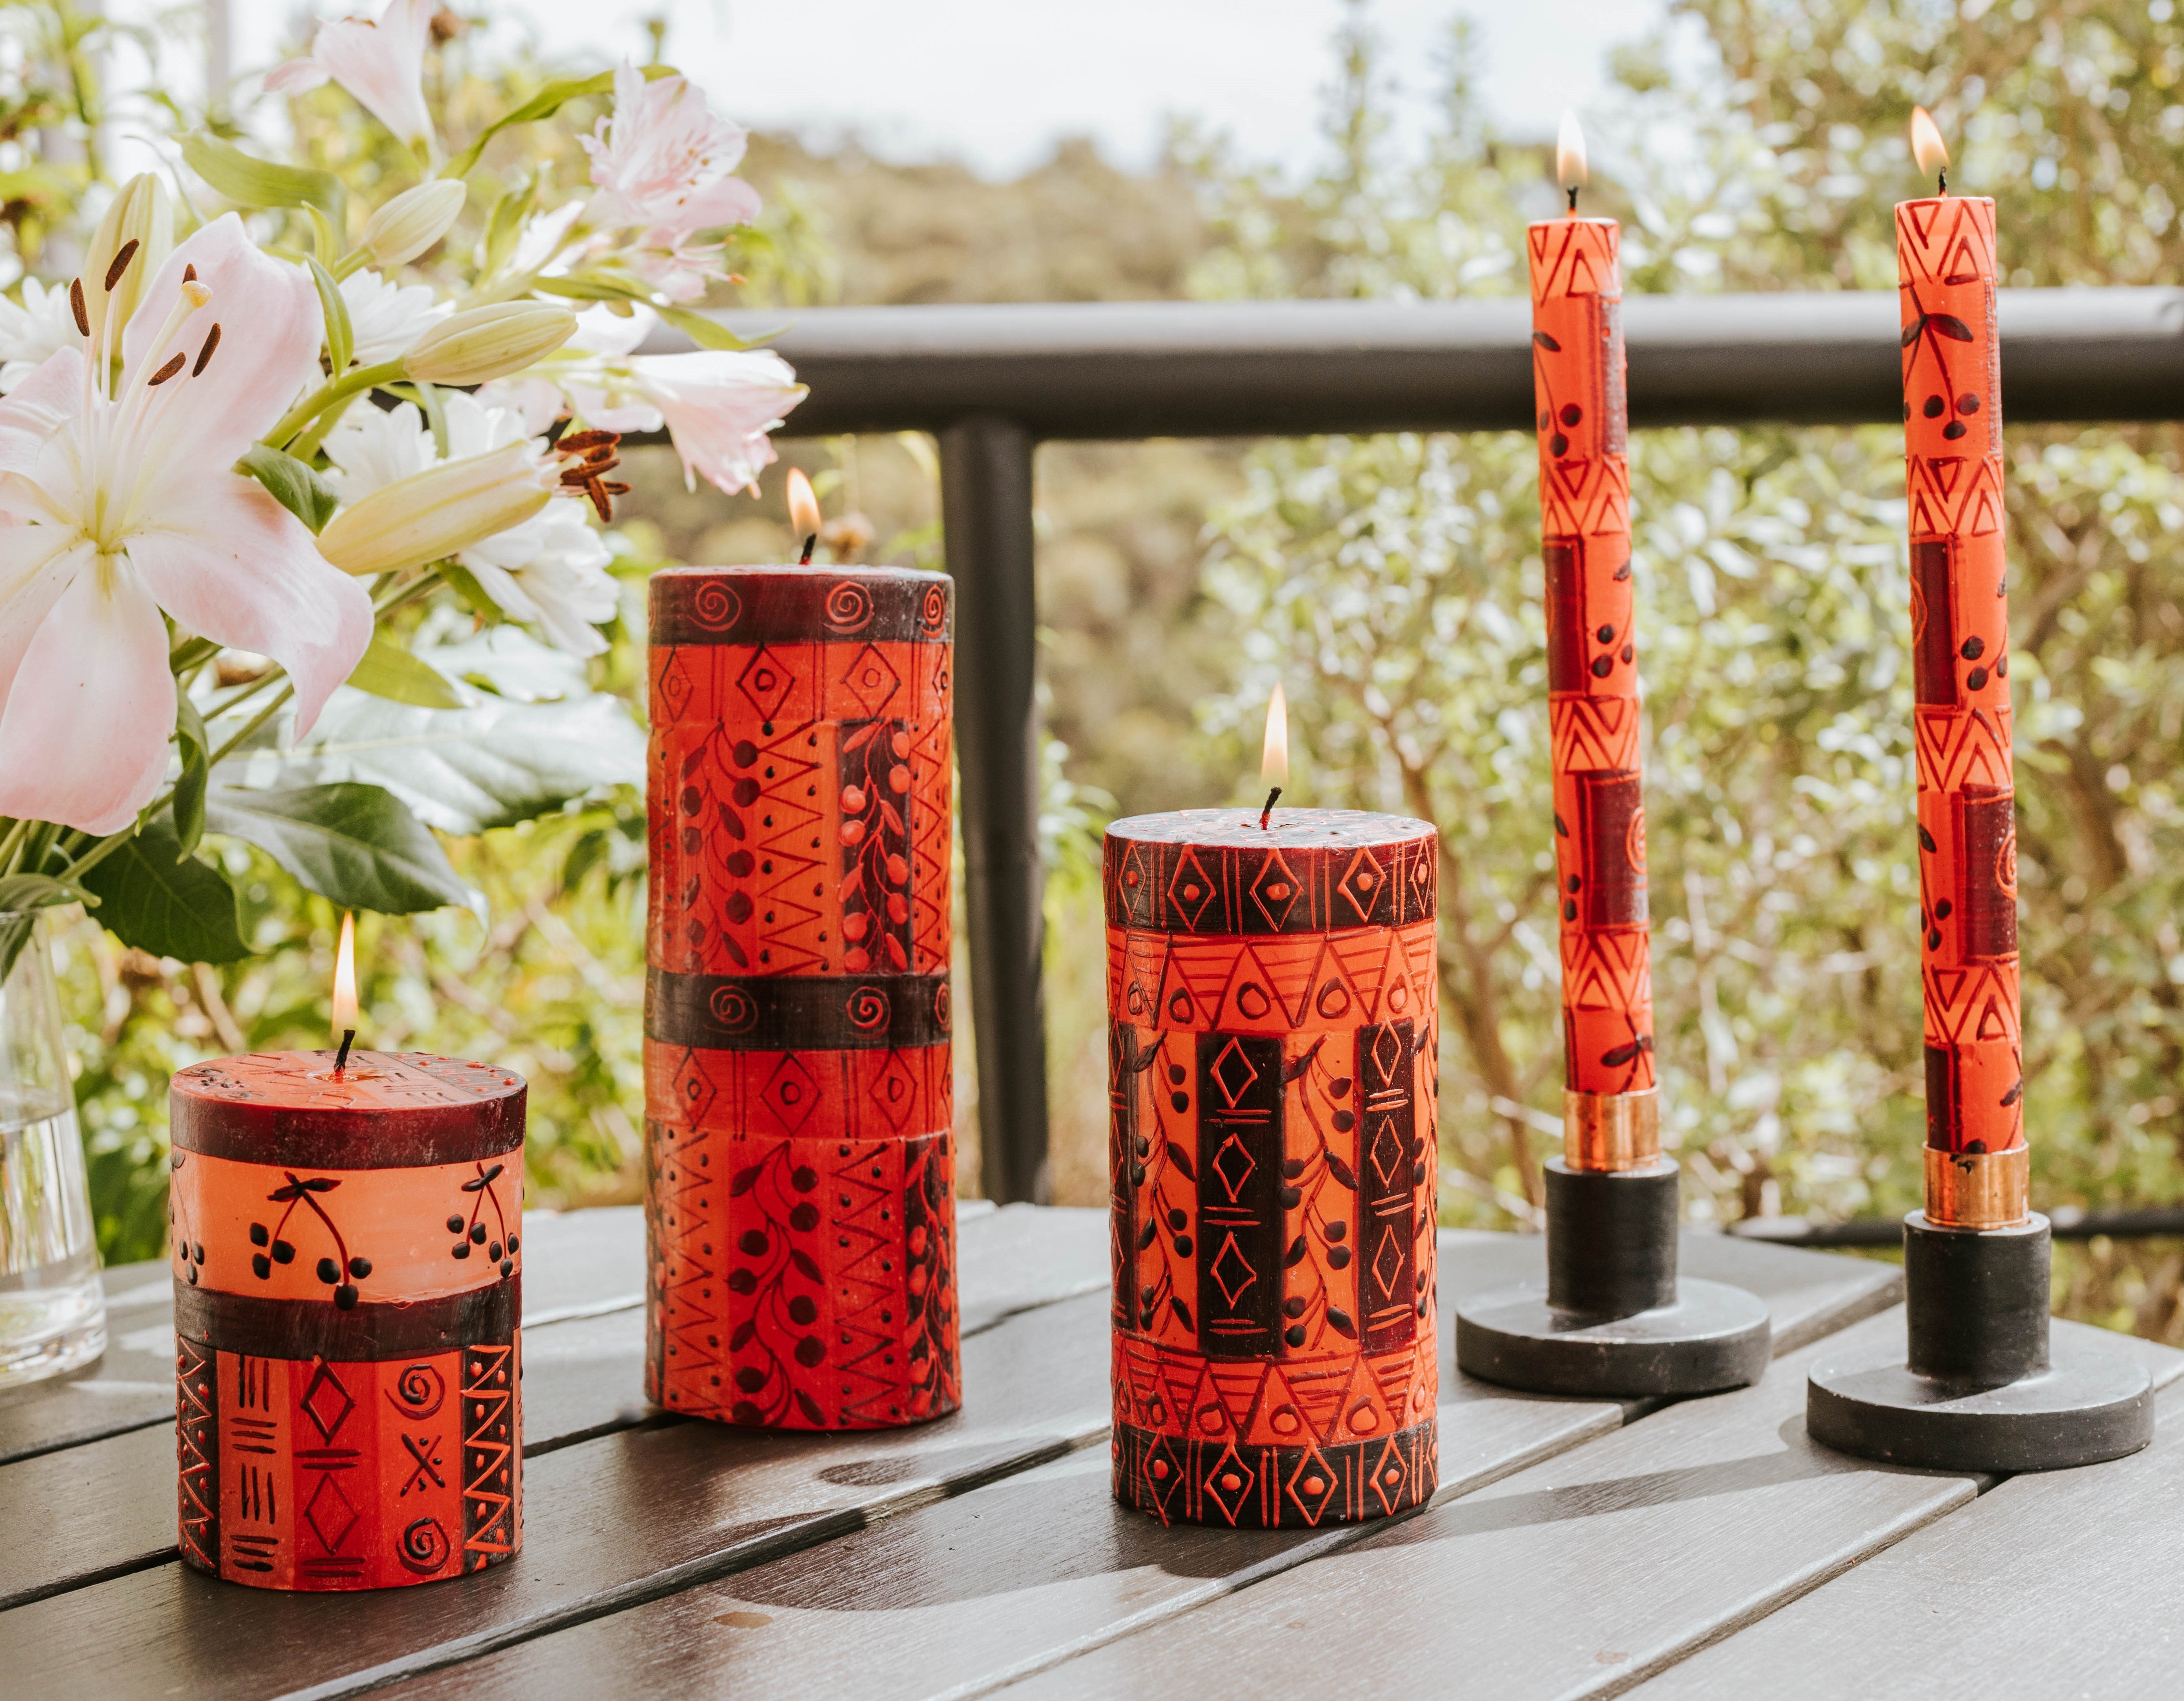 Sunny summer's day lifestyle photo of Berry Blaze pillars and tapers on a table burning brightly with lilies at the side! Just lovely!